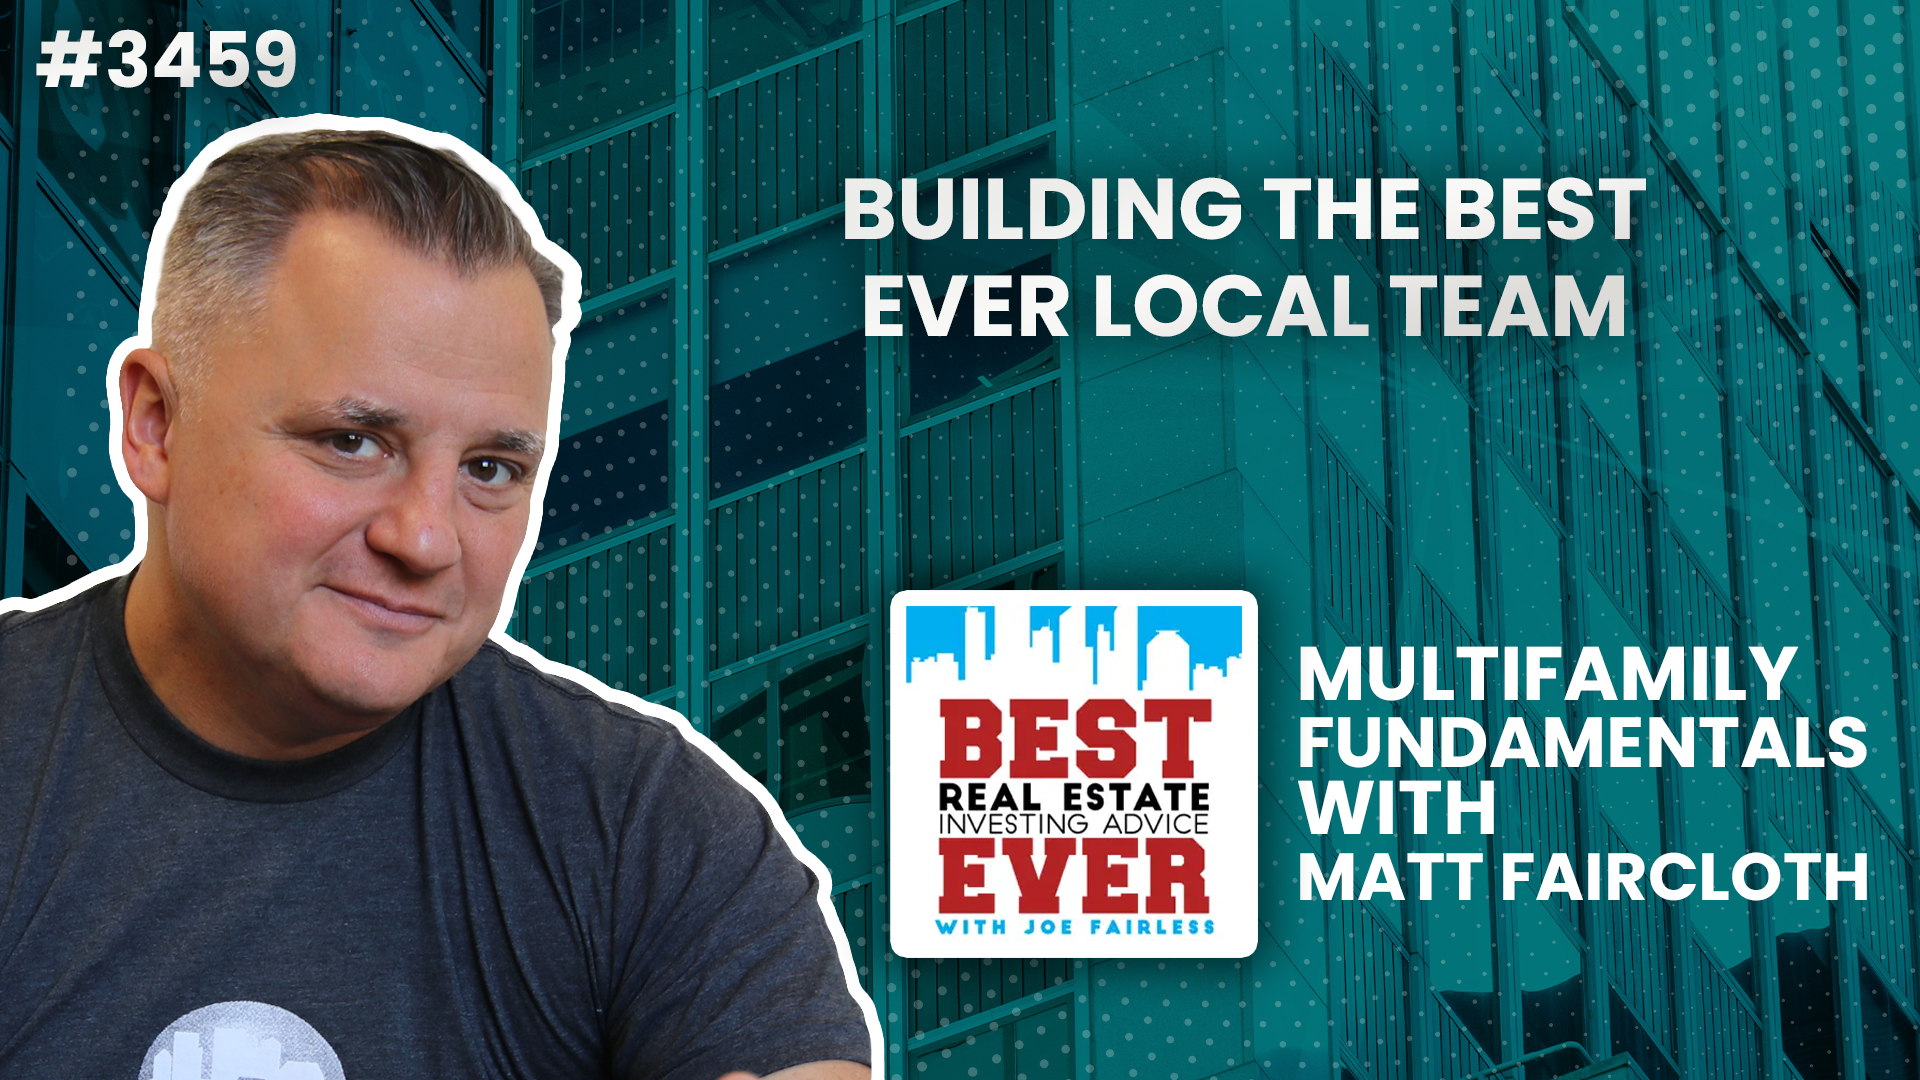 JF3459: Building the Best Ever Local Team | Multifamily Fundamentals